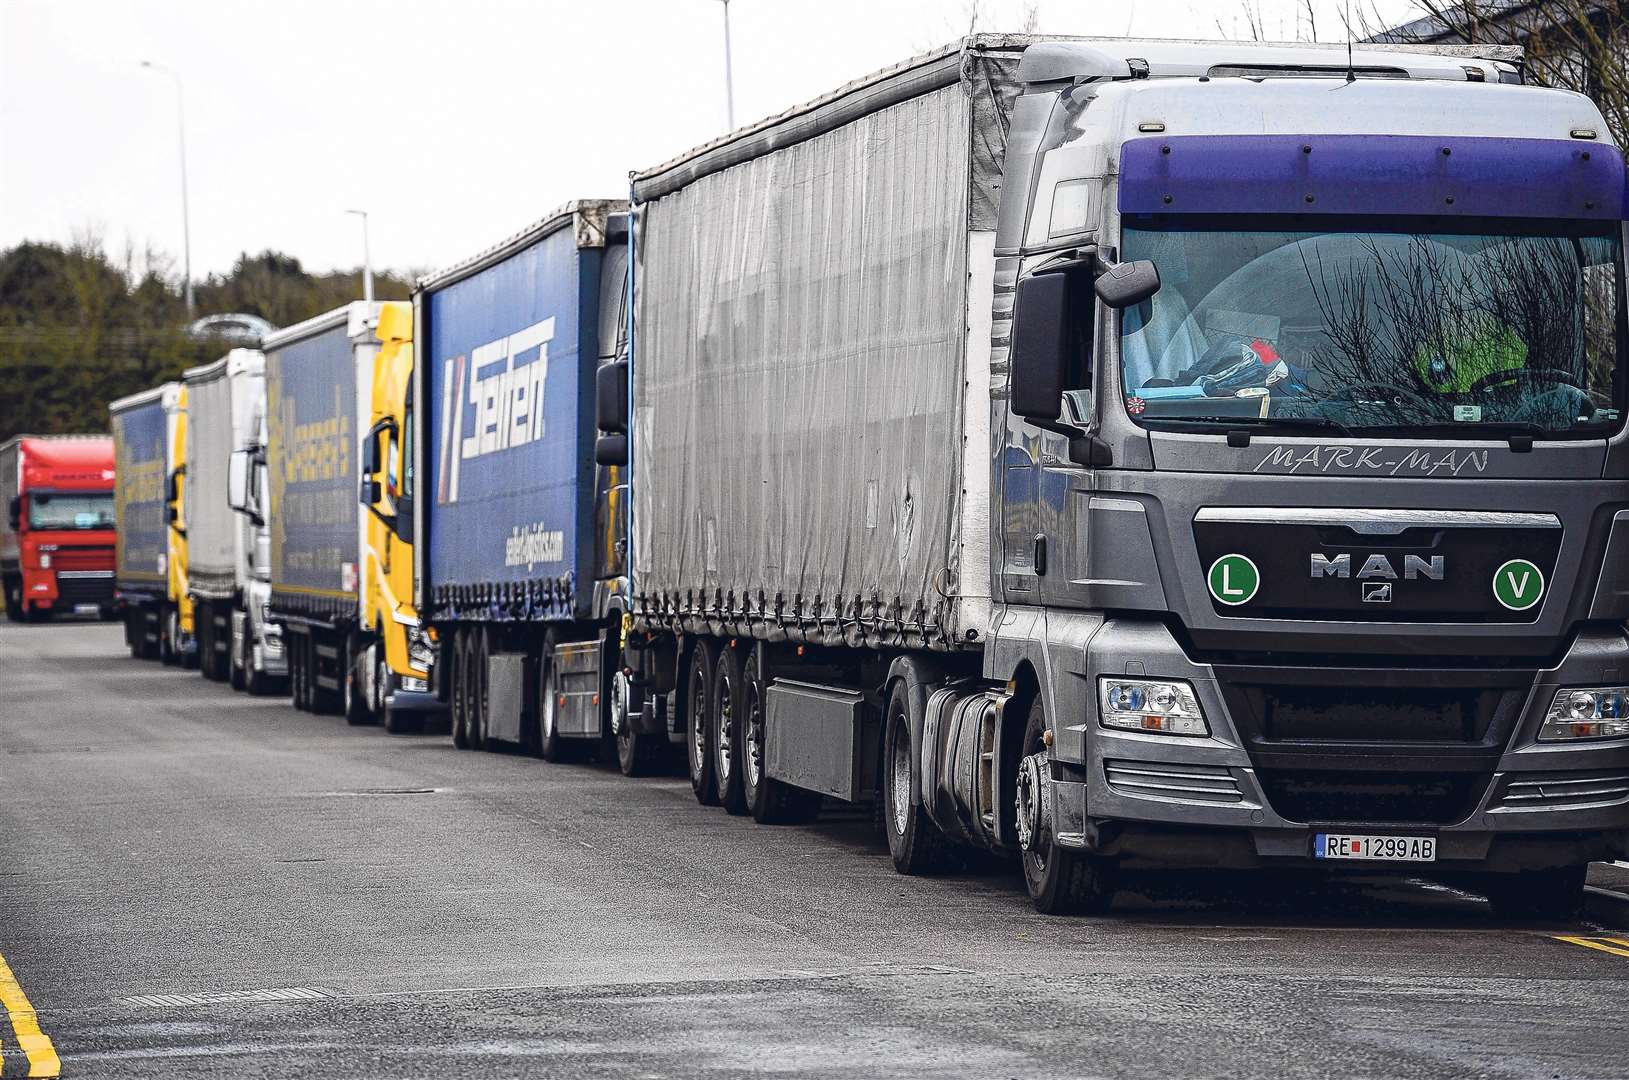 10,000 HGVs could be on the roads post-Brexit